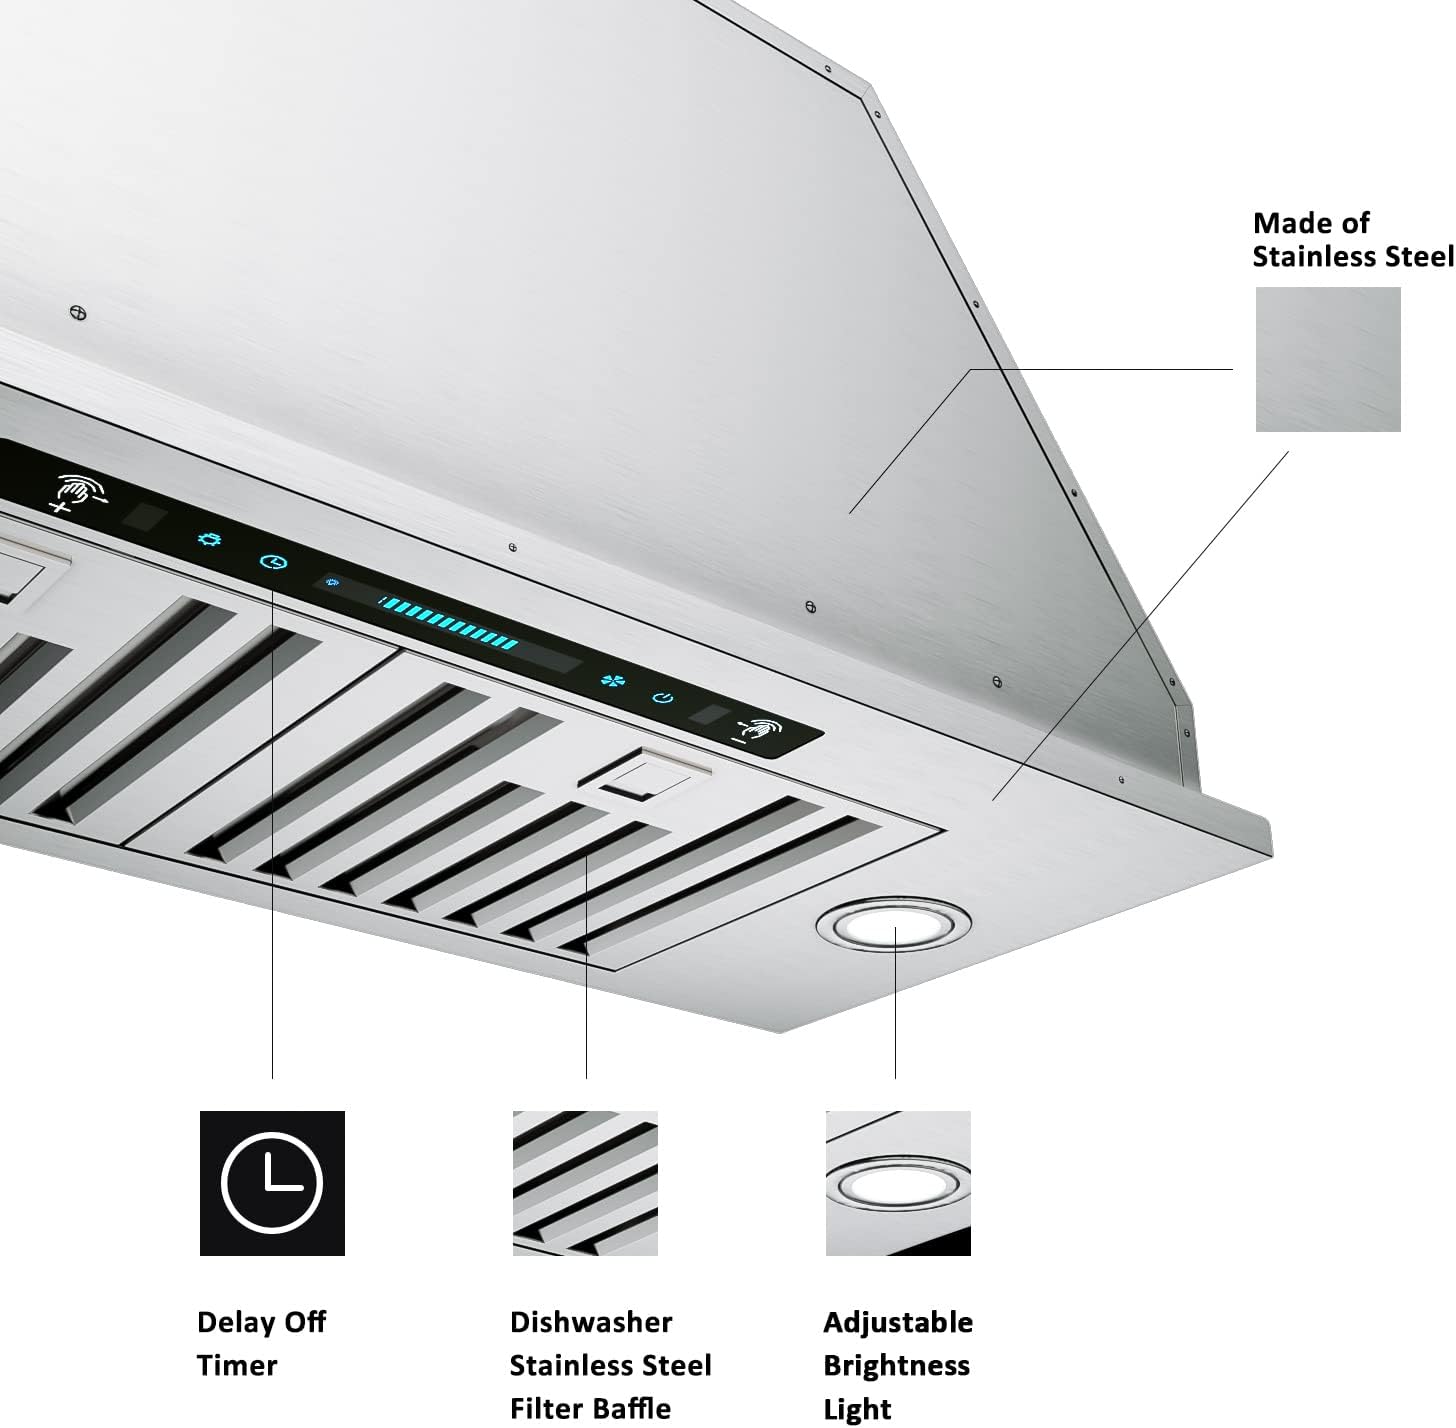 IKTCH 30 in. 900 CFM Ducted Insert Range Hood in Stainless Steel and White Glass with LED Lights